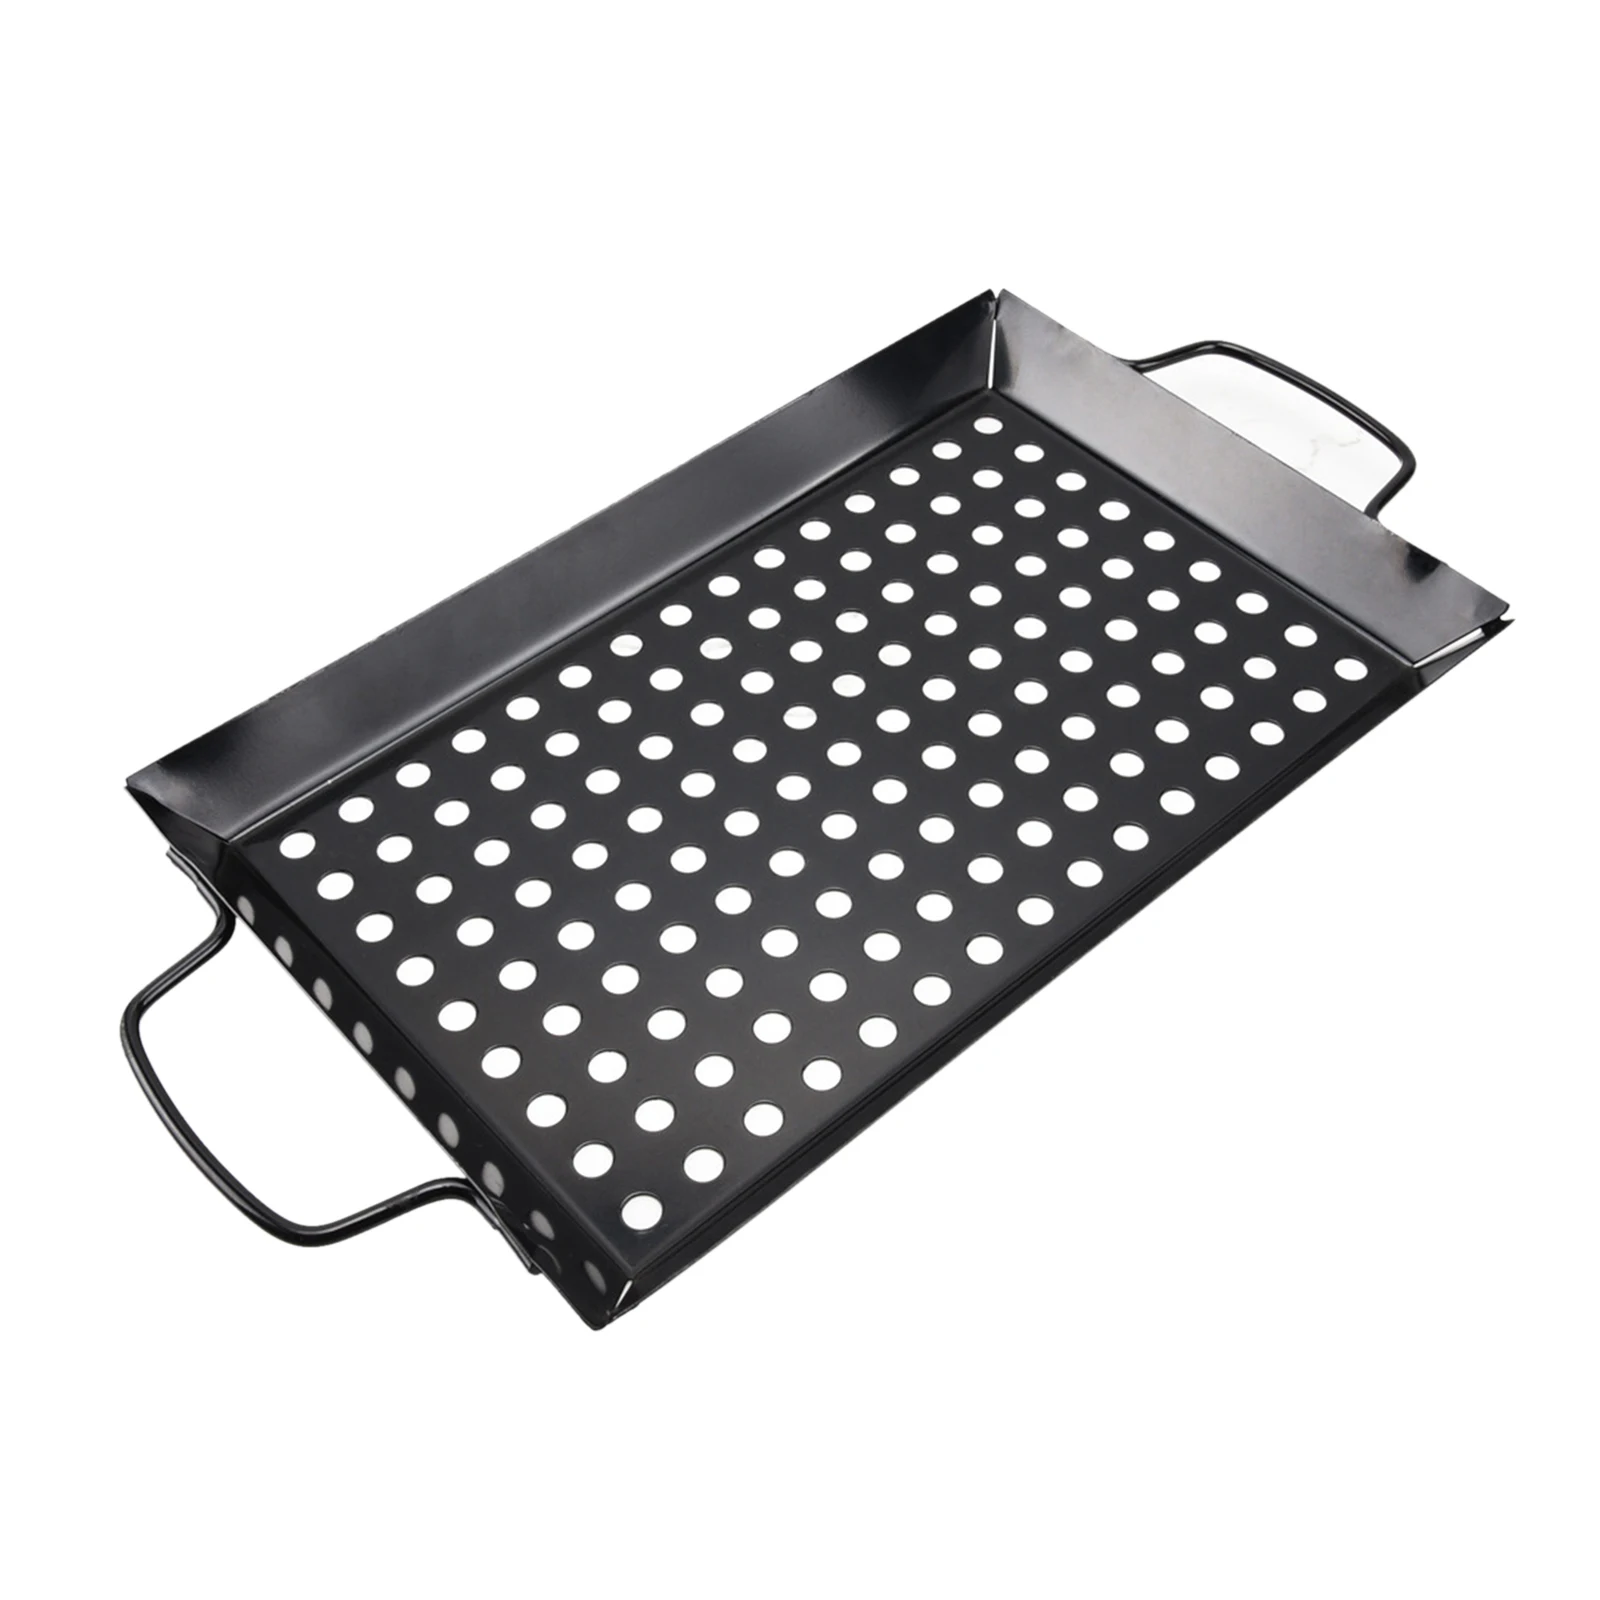 Large BBQ Tray Metal Barbecue Wok Pan Black Meat Vegetable Grill Tray